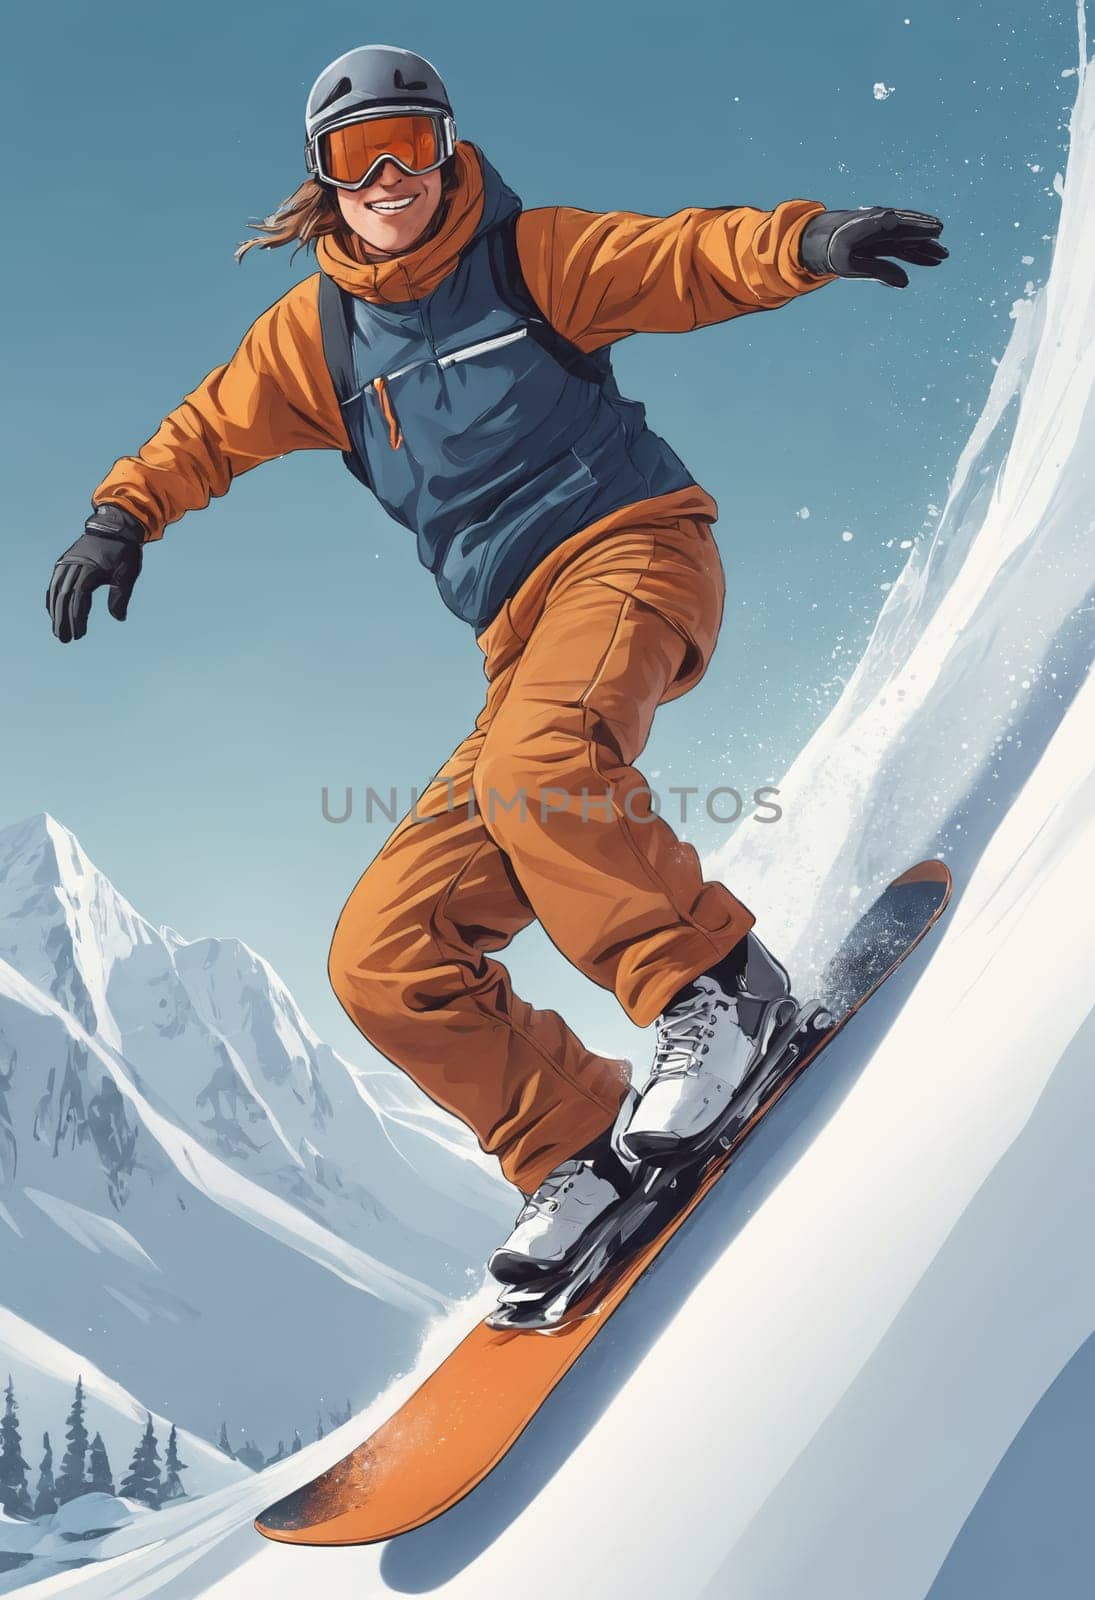 Snowboarder in blue and orange gear executes a dynamic turn on the slope.